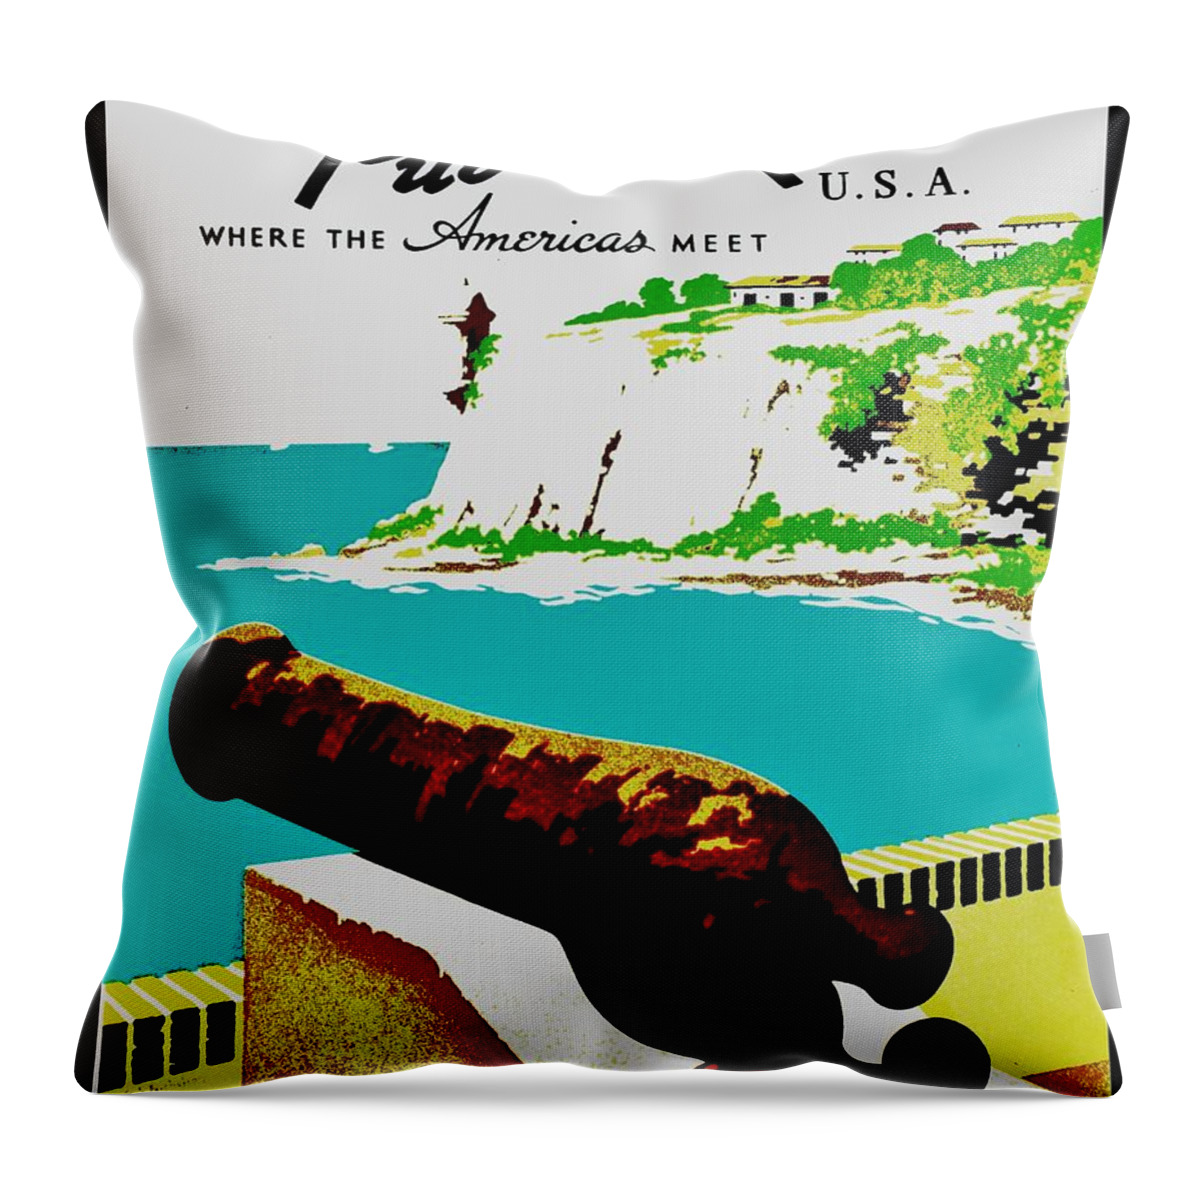 United States Throw Pillow featuring the photograph Vintage Poster - Puerto Rico #1 by Benjamin Yeager